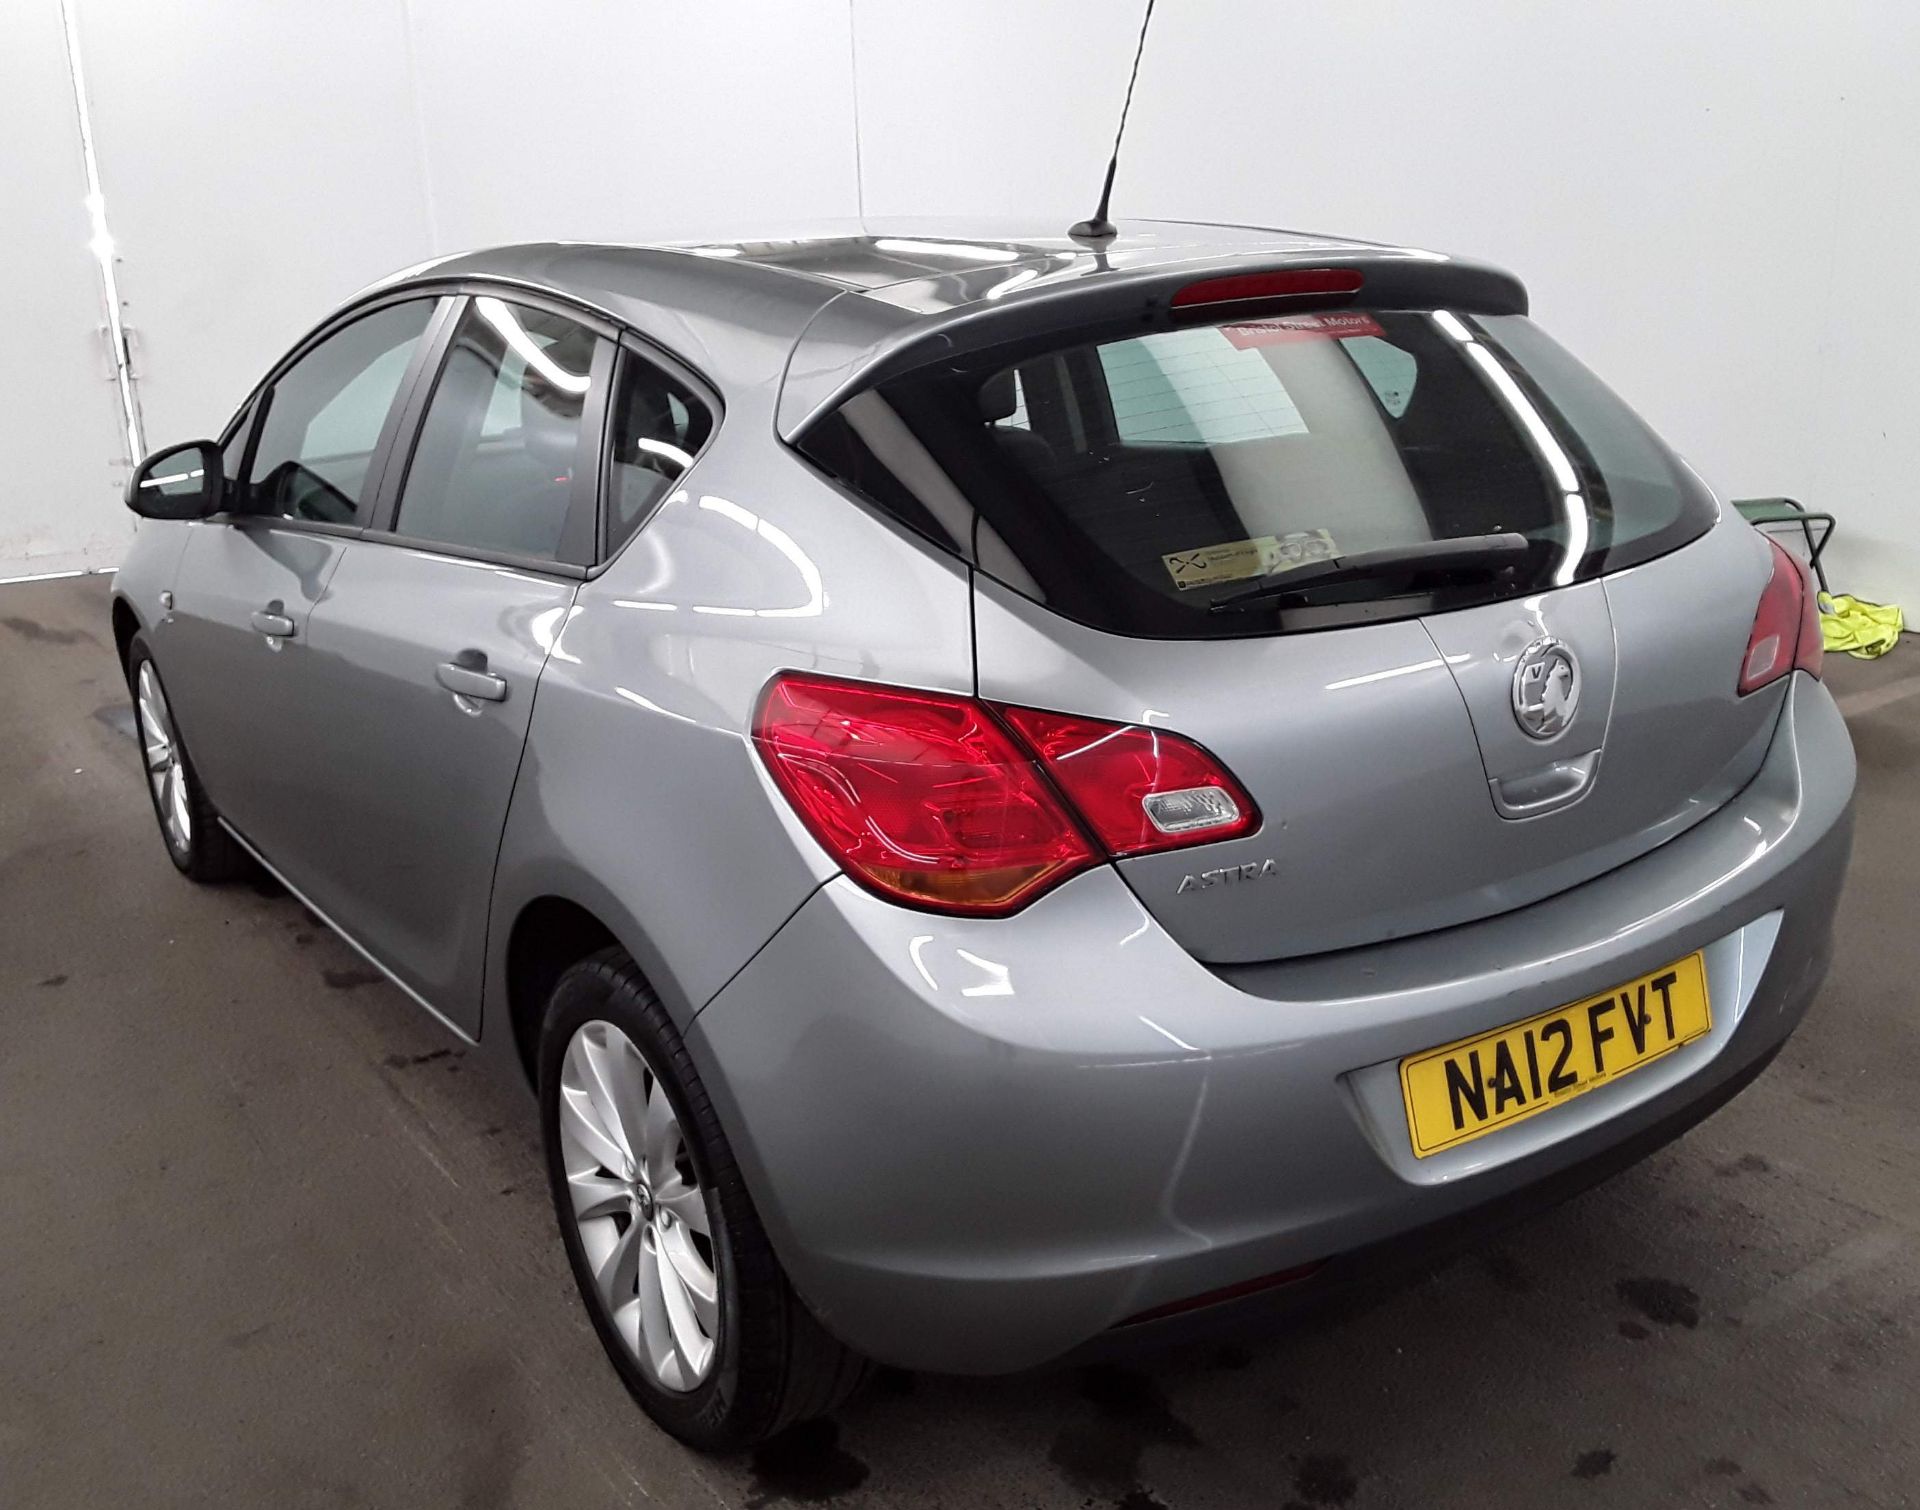 2012 Vauxhall Astra 1.4 Active 5 Door Hatchback - CL505 - NO VAT ON THE HAMMER - Location: Corby, - Image 4 of 11